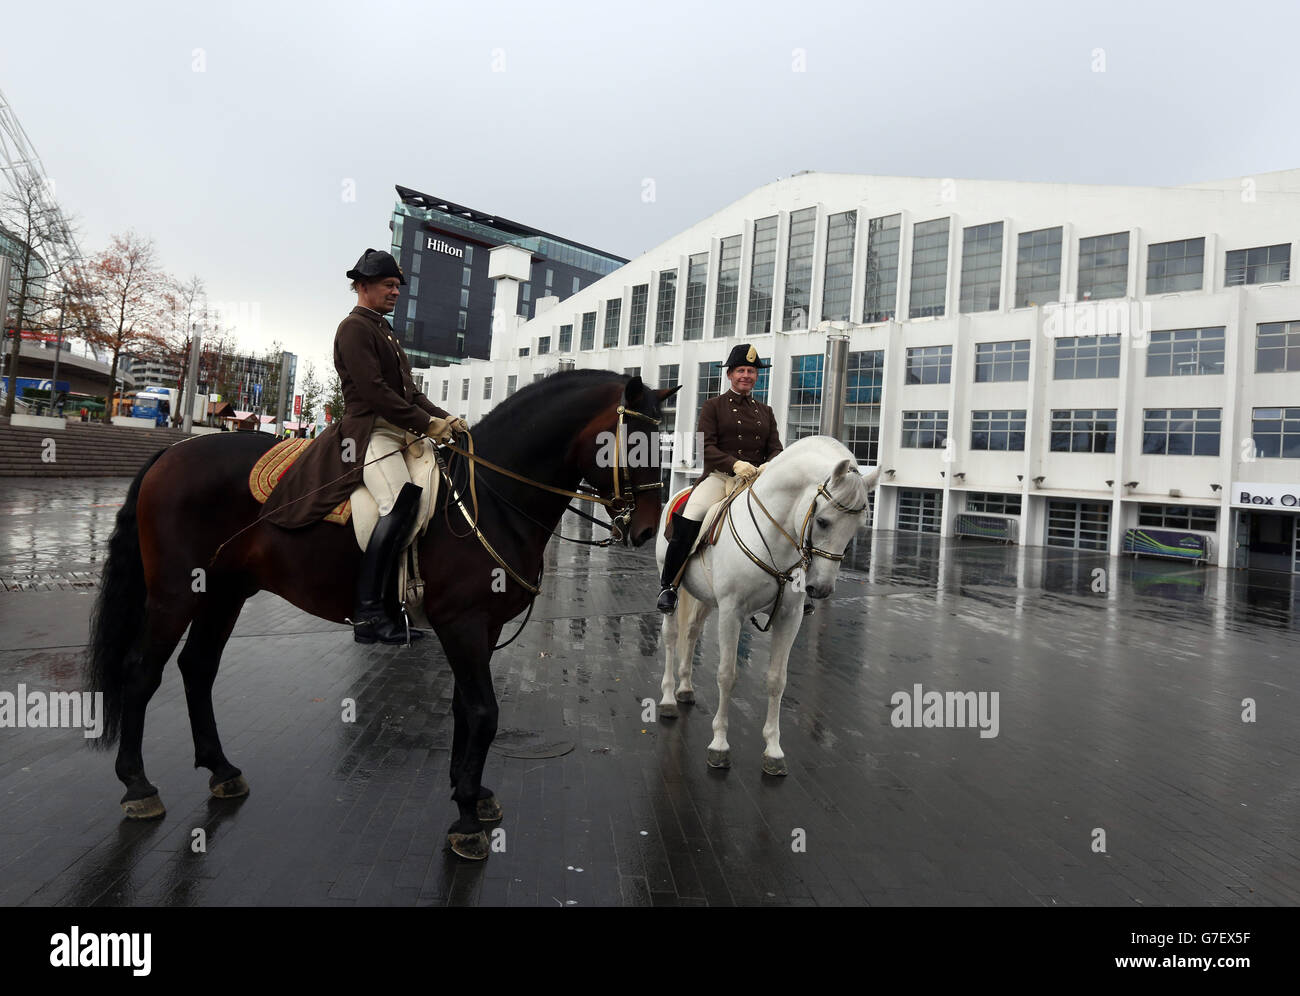 Members of the Spanish Riding School of Vienna Rider Herwig Radnetter (left) riding Pluto Sambata and First Chief Rider Wolfgang Eder with his horse Pluto Malina pose in front of Wembley Stadium in west London where the riding school are performing at Wembley Arena from Friday to Sunday. Stock Photo